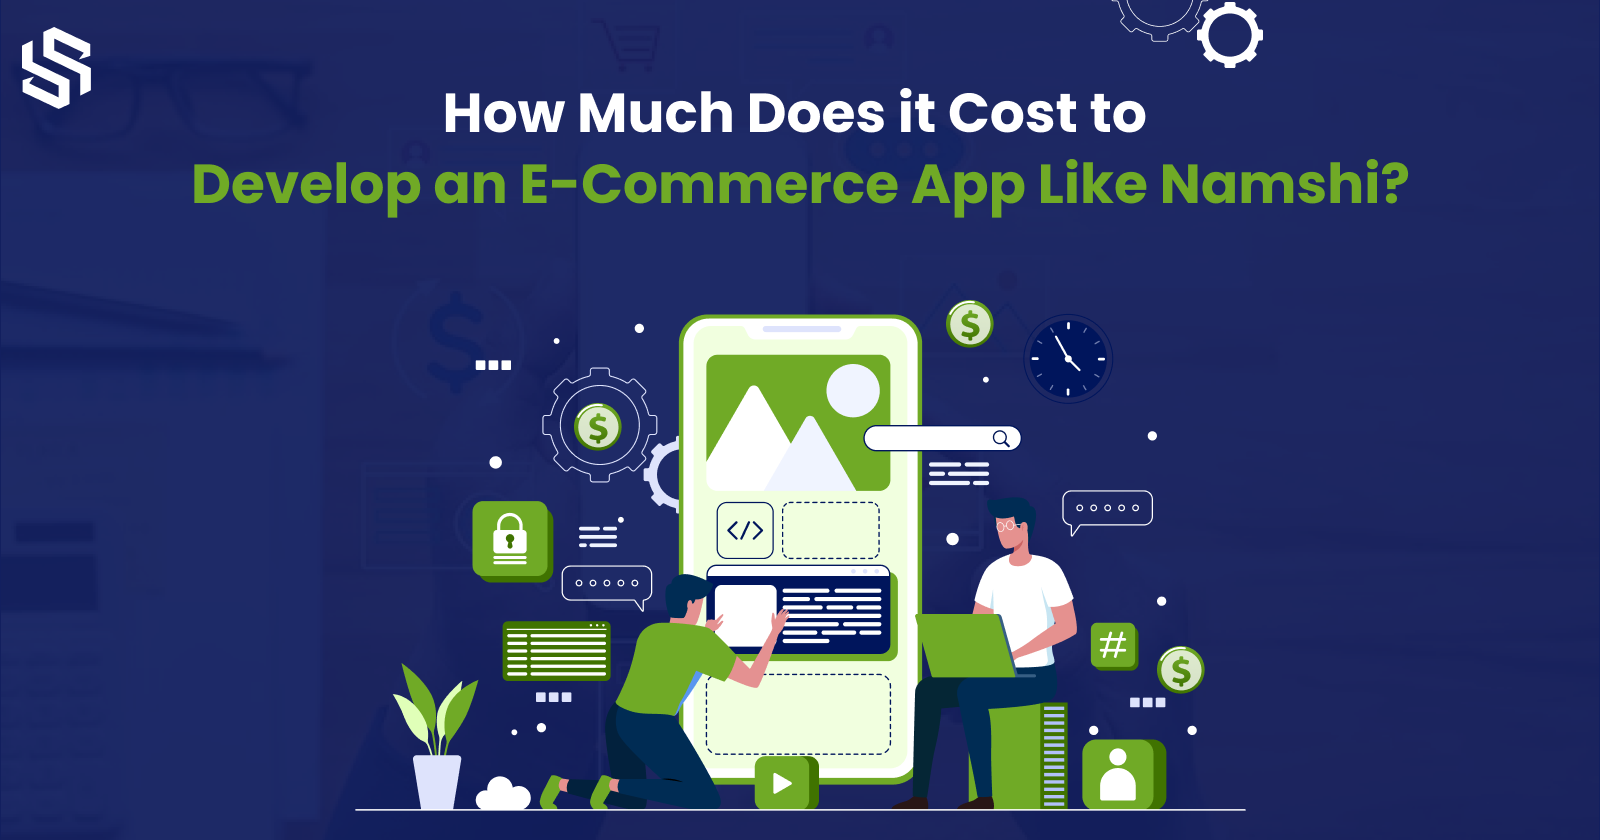 How Much Does it Cost to Develop an E-Commerce App Like Namshi